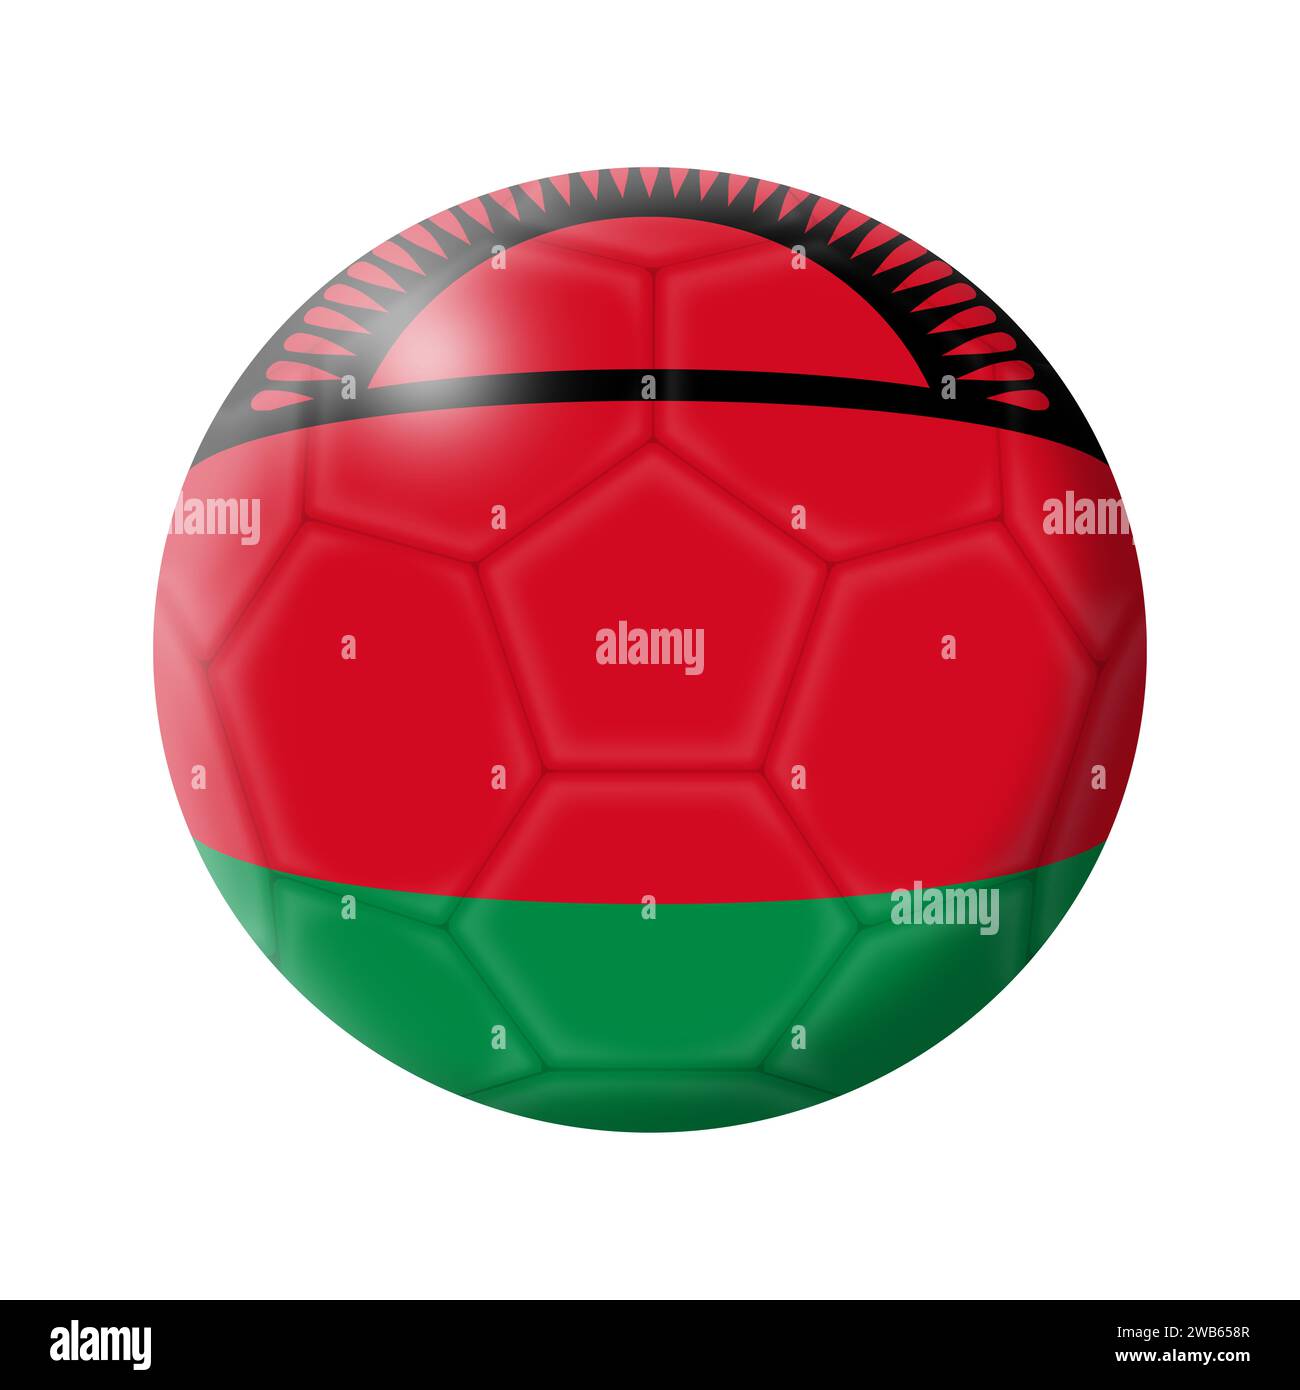 Malawi soccer ball football 3d illustration with clipping path Stock Photo